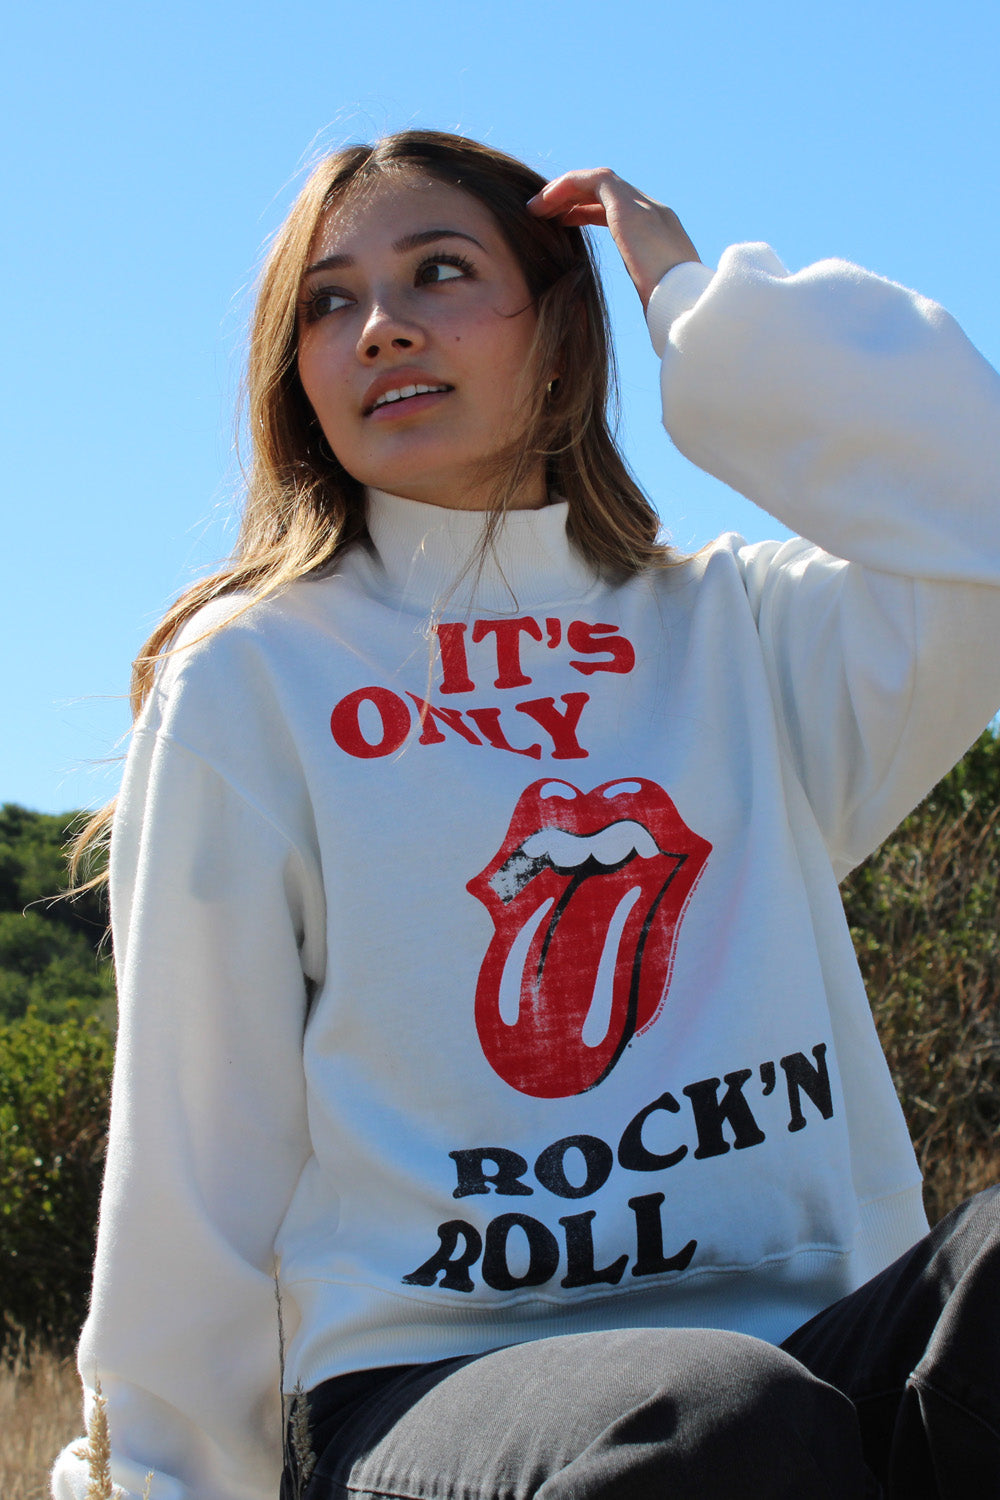 The Rolling Stones "It’s Only Rock N' Roll" Sweater